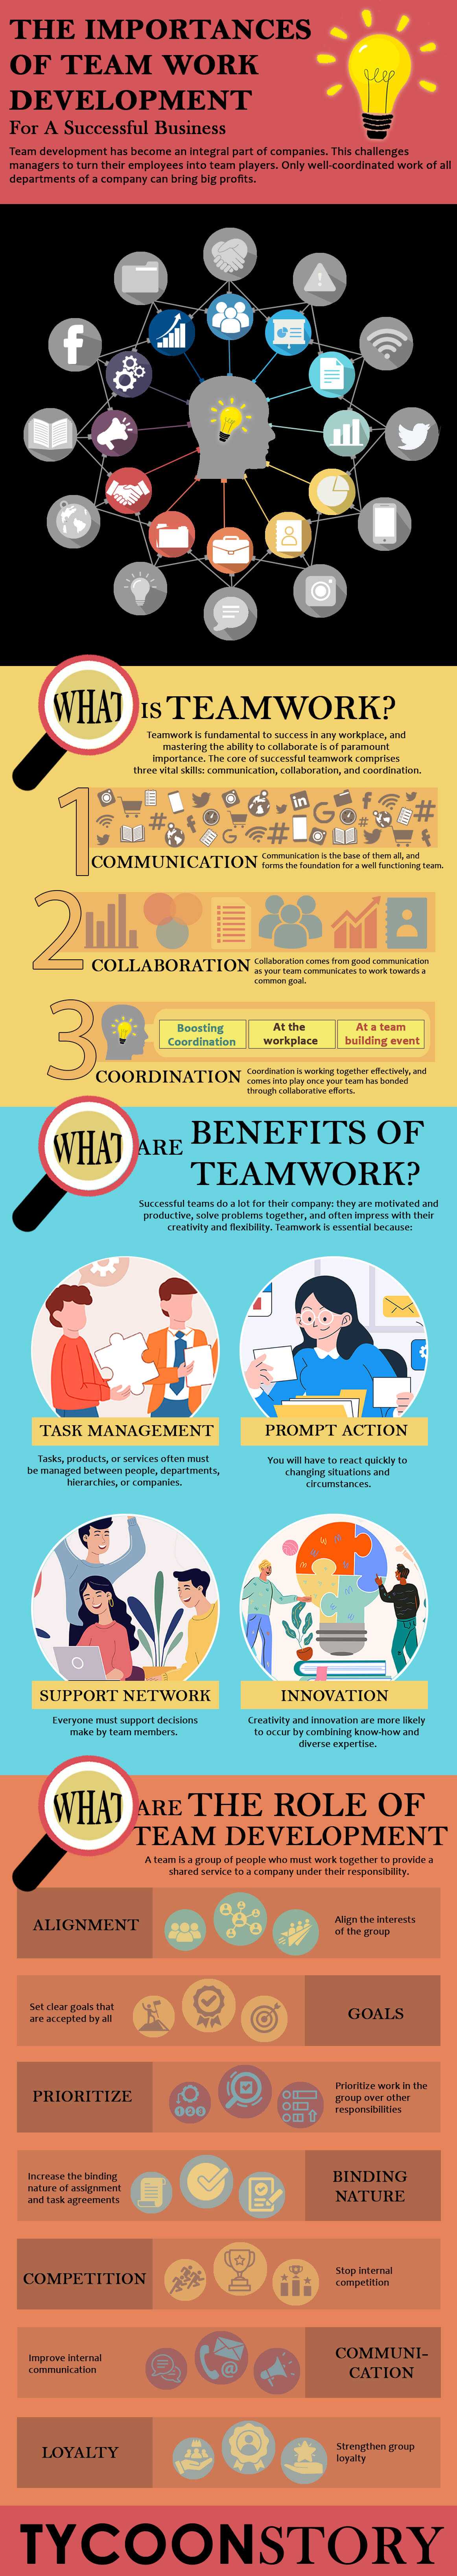 Team development is an important part of running a successful business